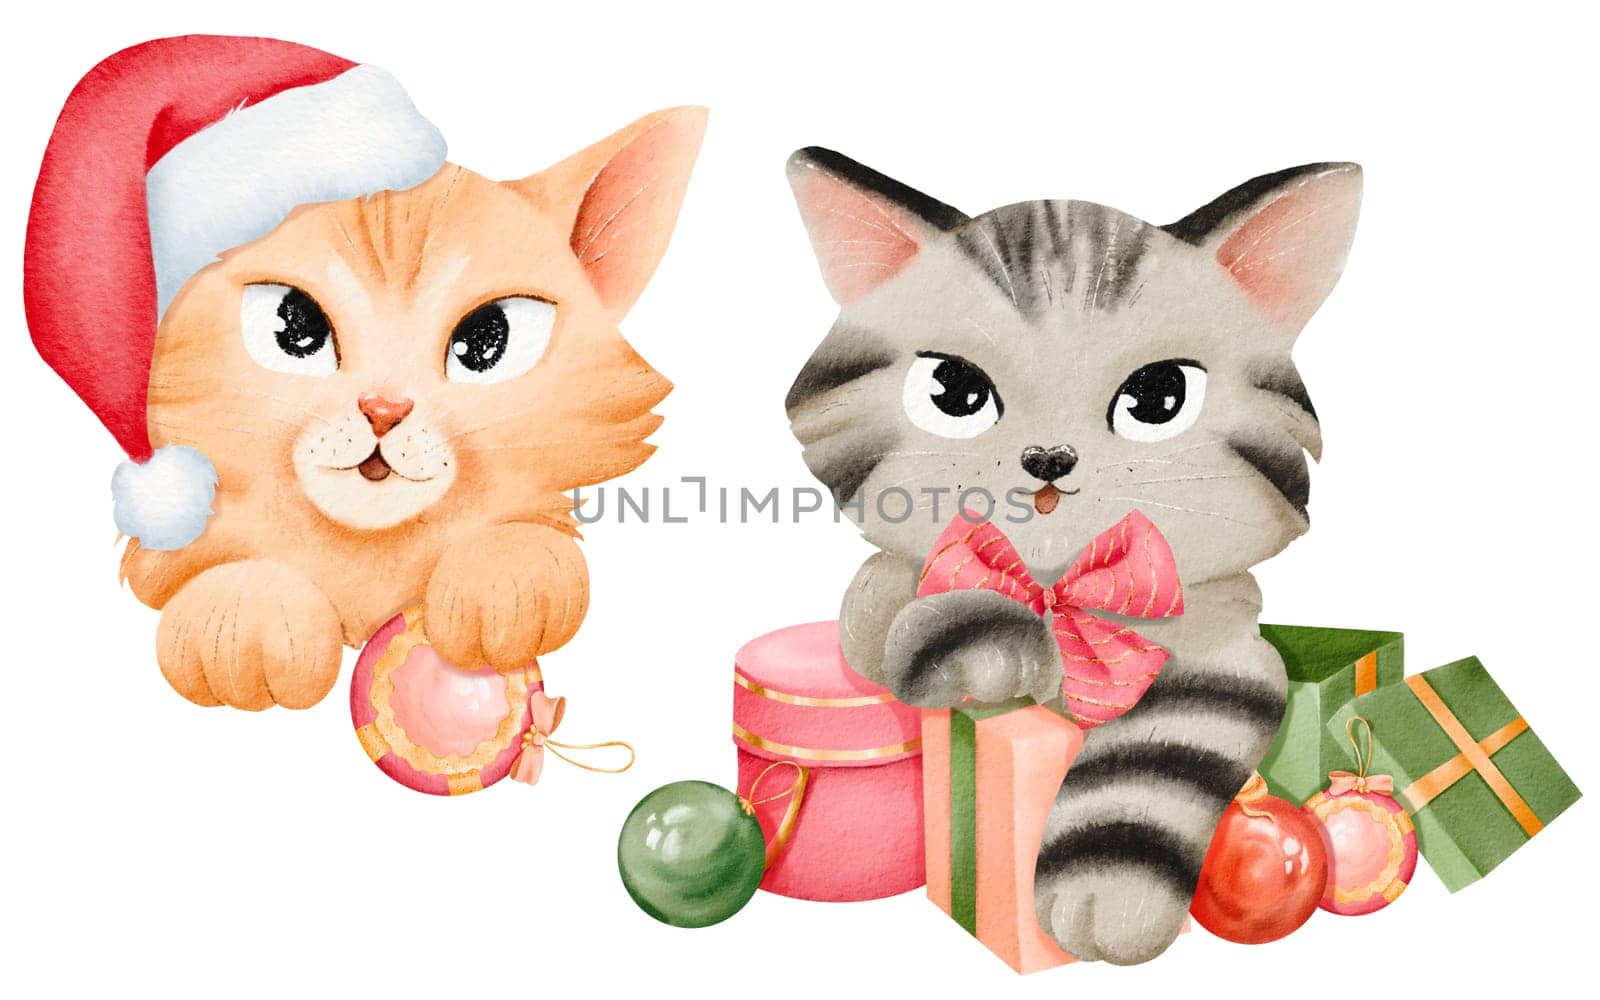 A set of adorable kittens in a festive mood. Santa hats, Christmas ornaments, and gifts. Cat portraits for stickers, cards, sets, design elements. Isolated watercolor digital illustrations by Art_Mari_Ka